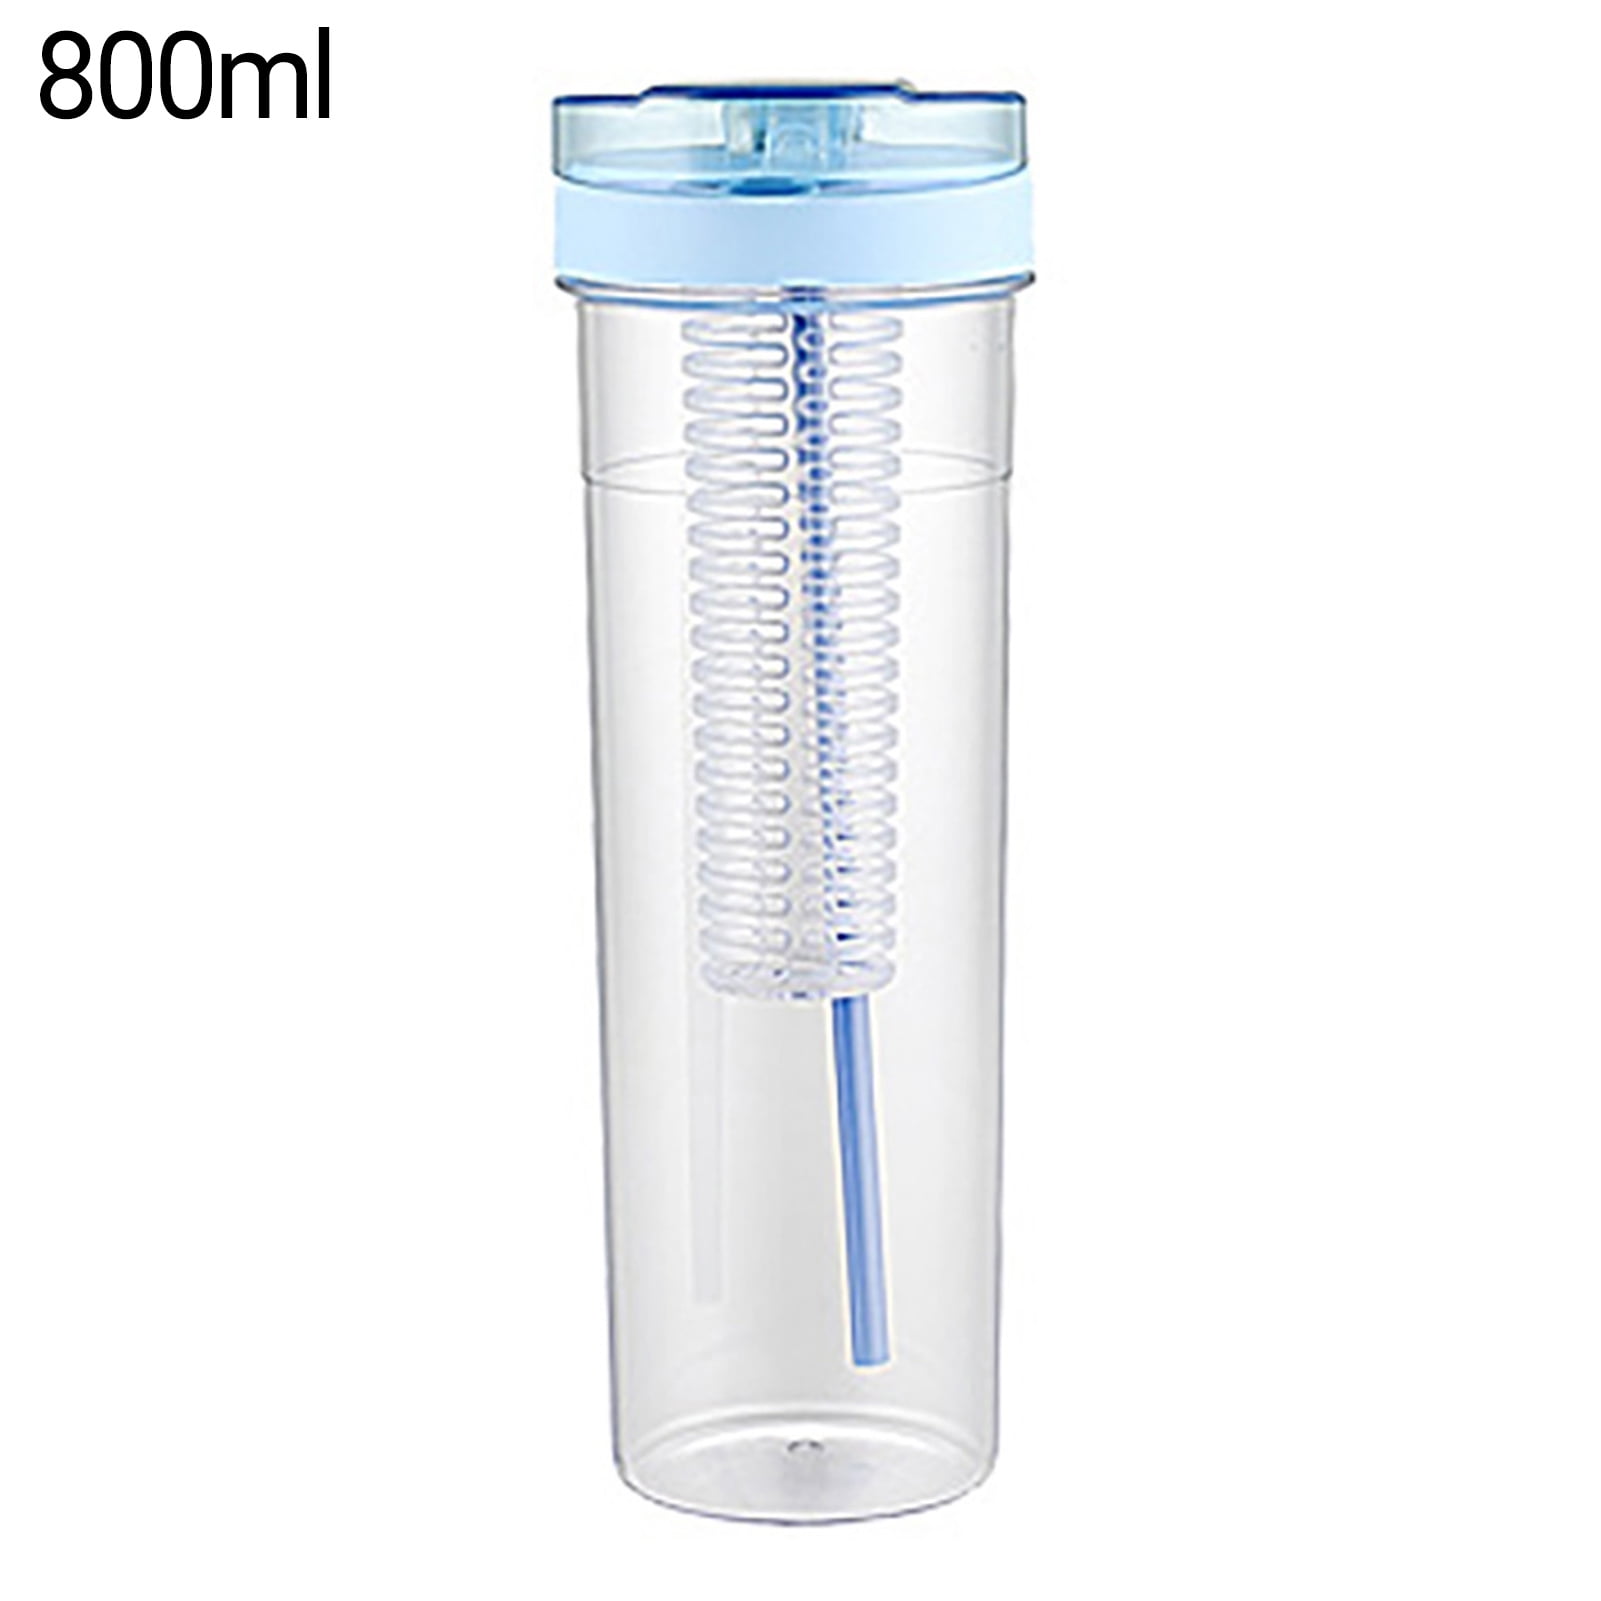 GO! Lunchtime - Travel Meal & Snack Convenience - Infuser Water Bottles